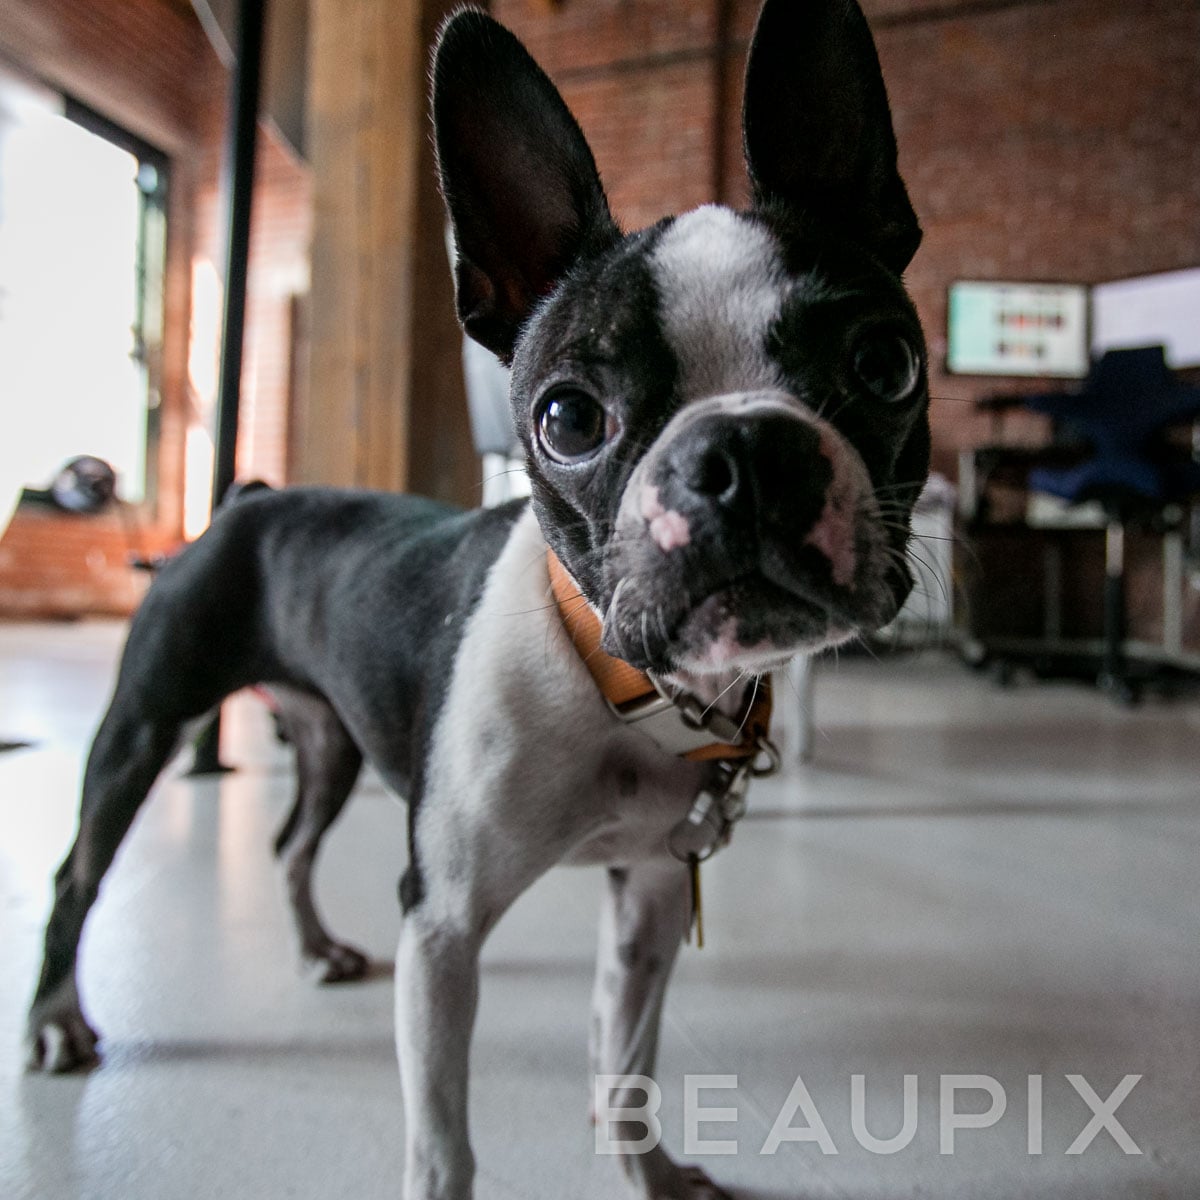 A Boston Terrier confuses the photographer